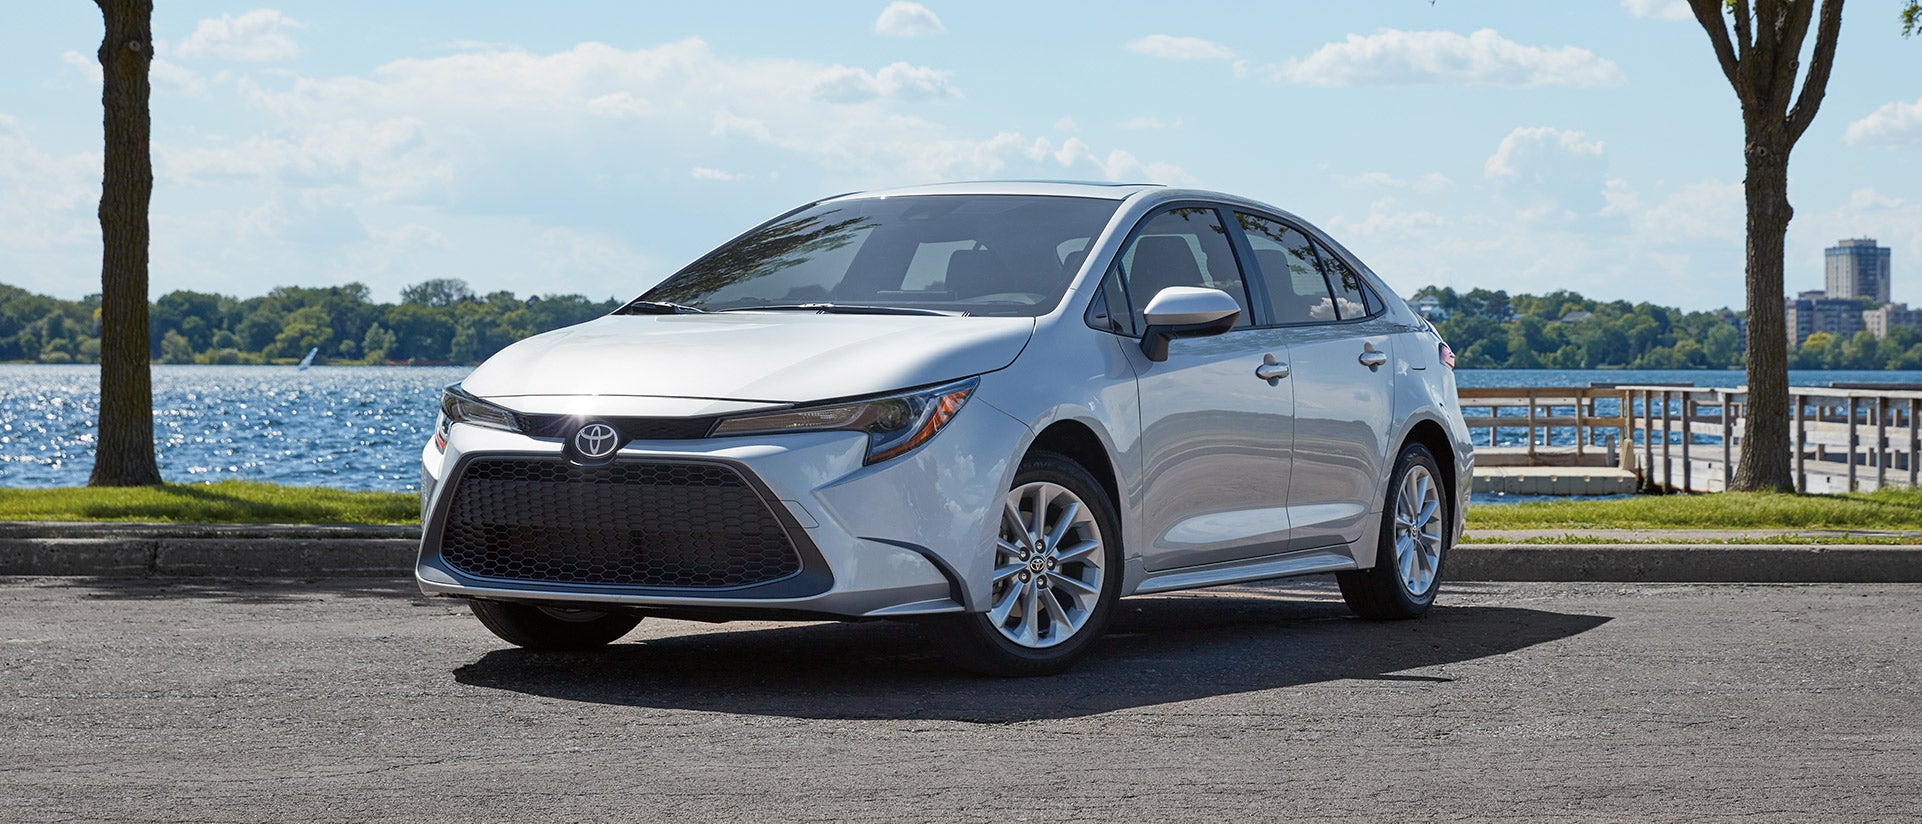 Leasing versus buying a Toyota at Fiore Toyota in Hollidaysburg | Silver MY20 Corolla Parked Lake